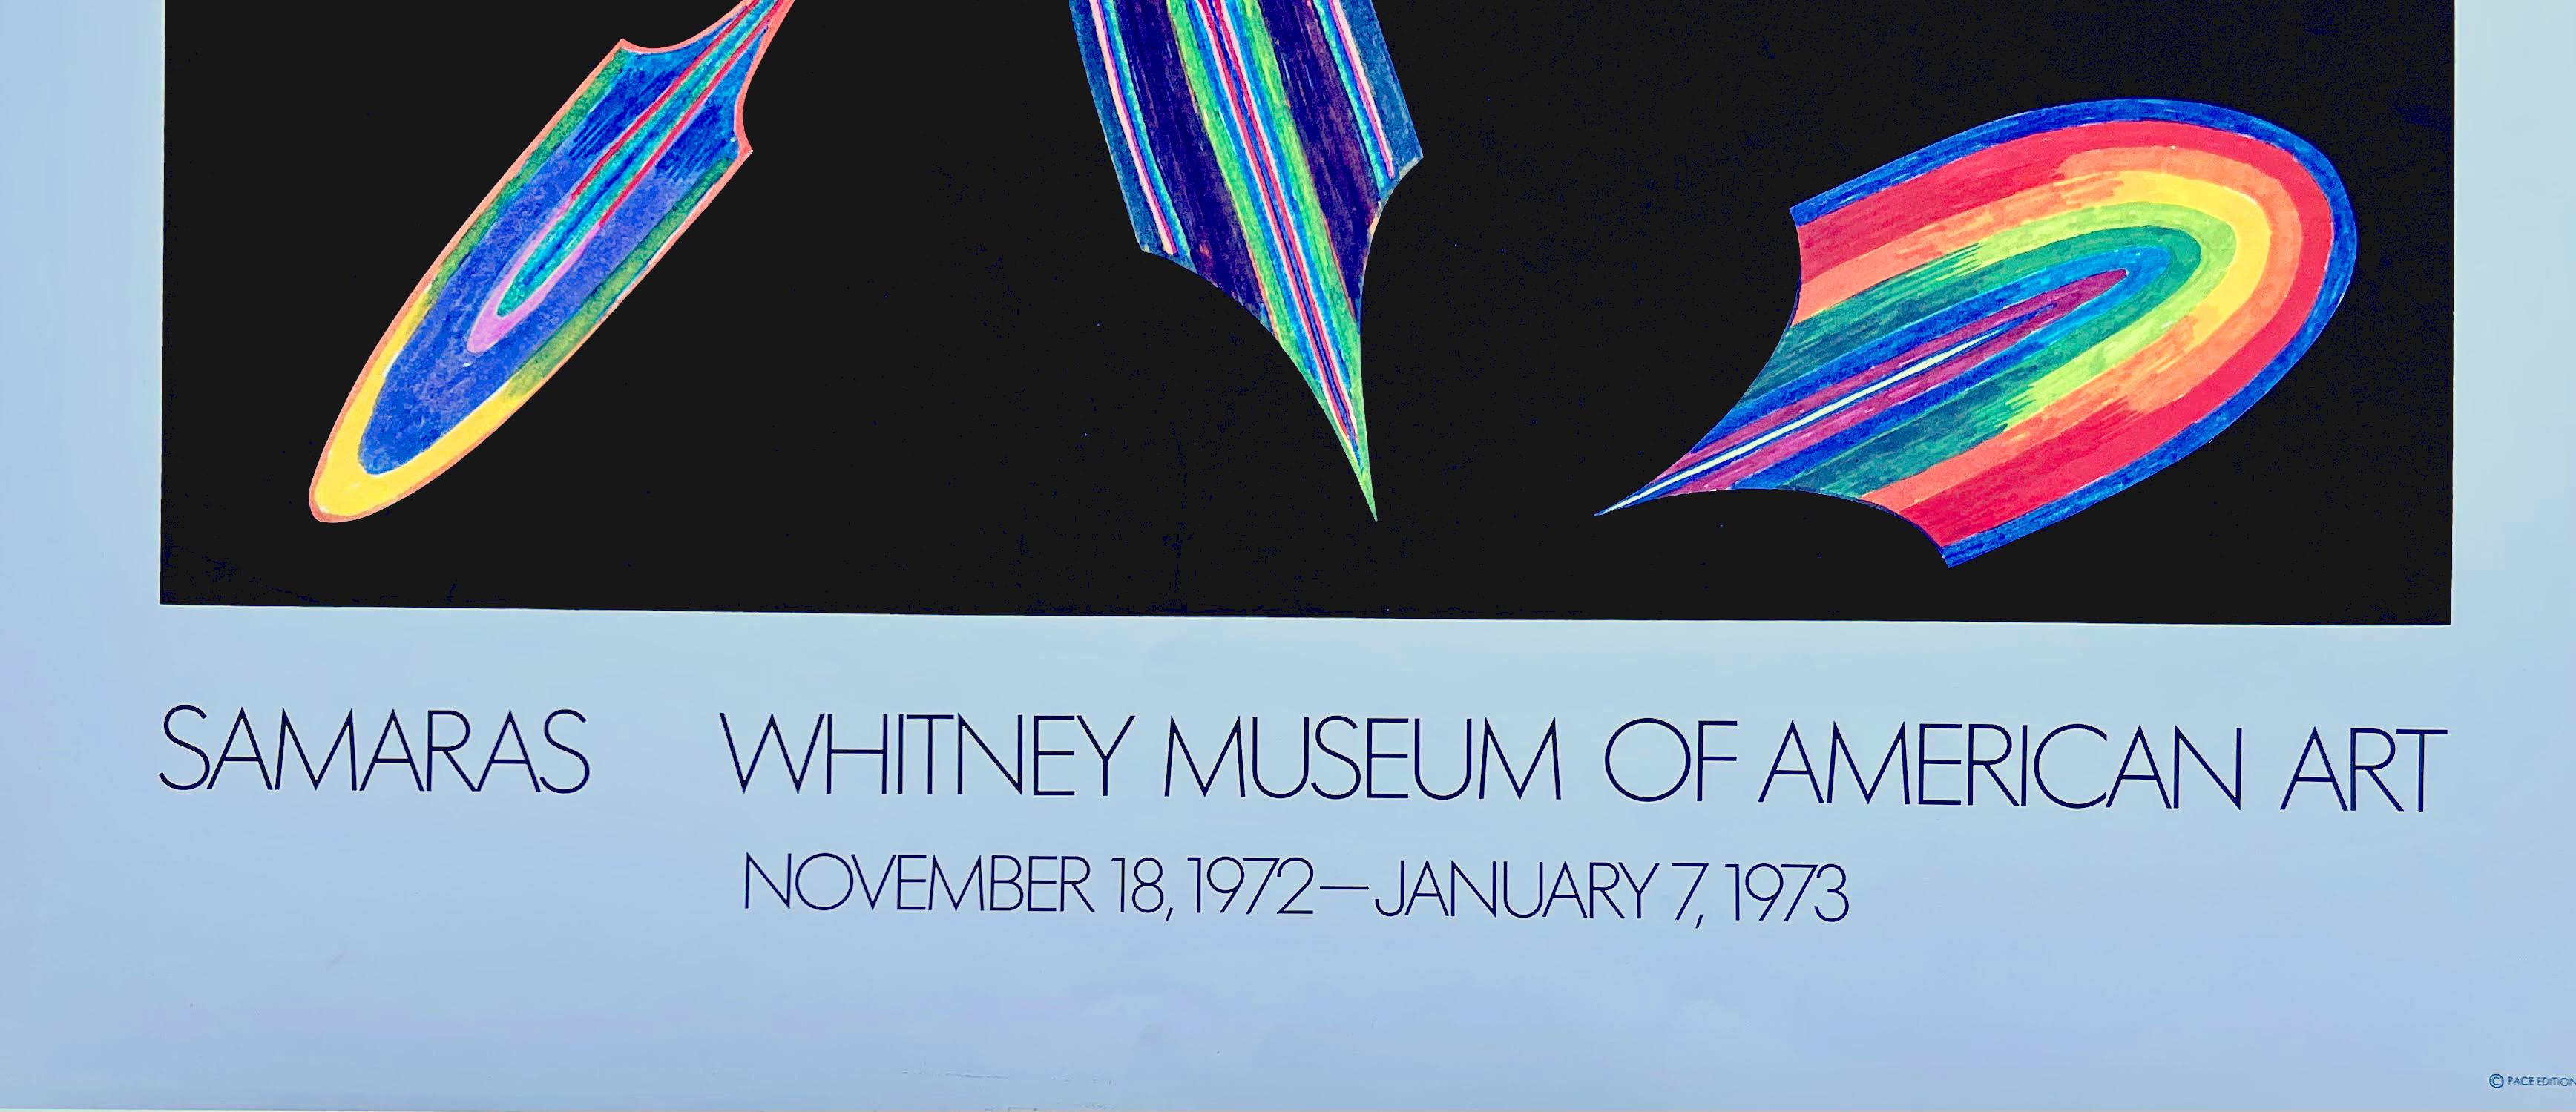 Lucas Samaras
Samaras at Whitney Museum of American Art Exhibition Poster, 1973
Offset lithograph poster
32 × 24 inches
Unframed
This early vintage poster was published for the Samaras exhibition at the Whitney Museum of American Art from November